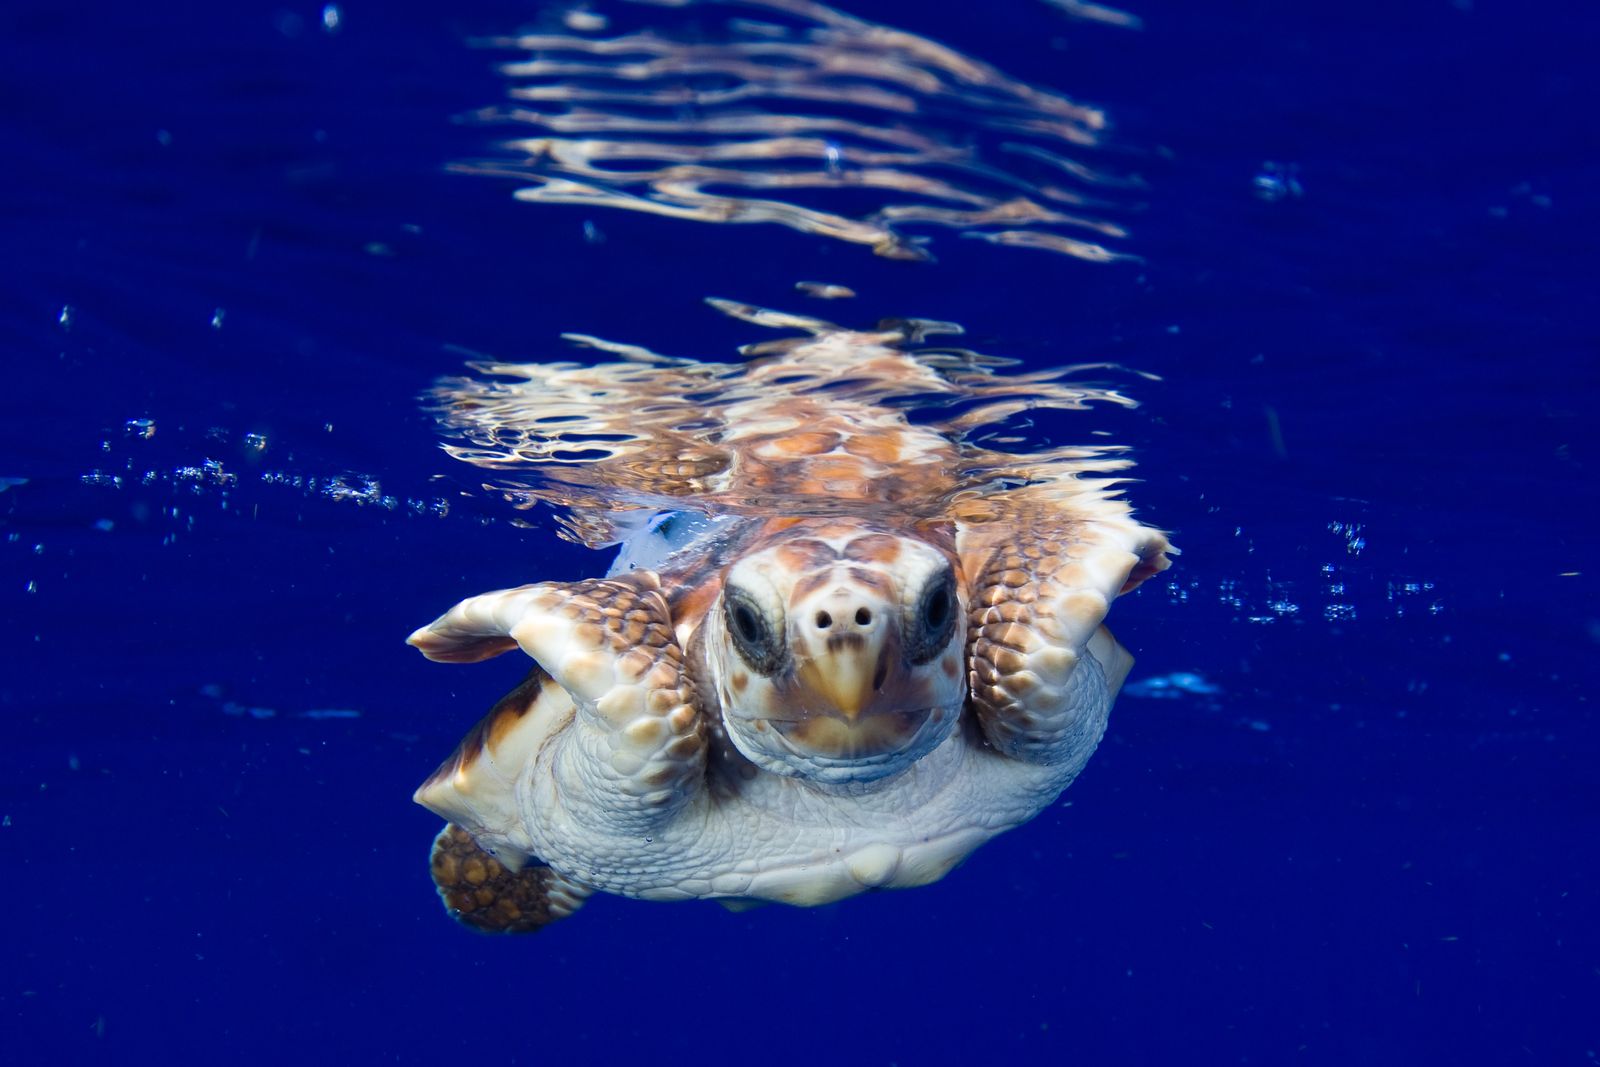 Where Do Newly Hatched Baby Sea Turtles Go? | Science| Smithsonian Magazine